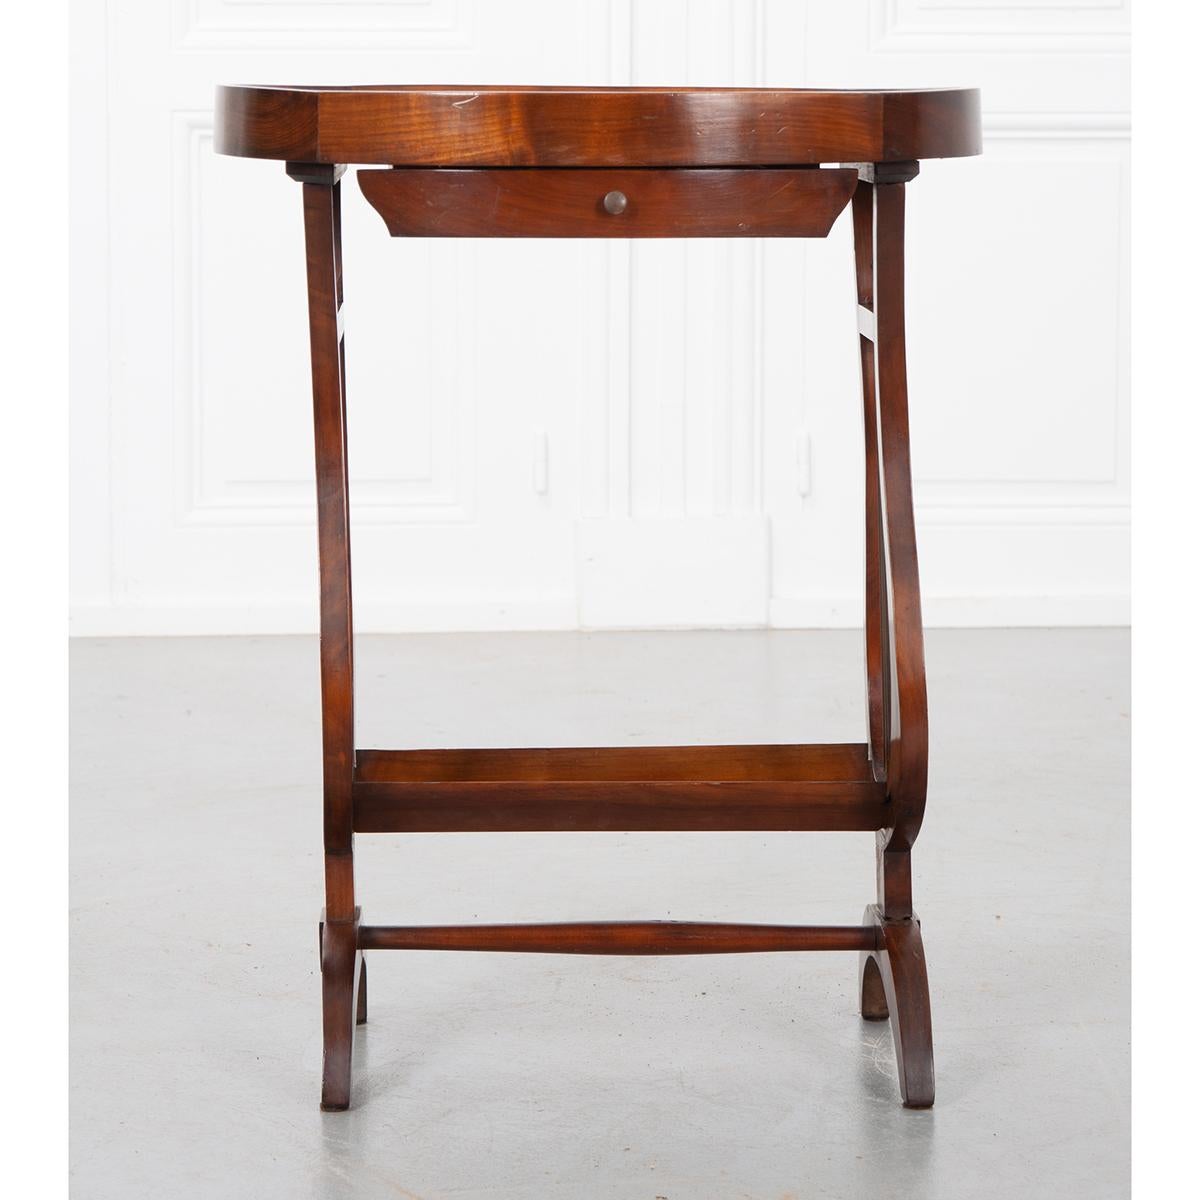 This is a delightful, mahogany accent table from France. The oval table top has a beveled frame extending above the top’s surface, giving the top a tray-like appeal, making it ideal for emptying your pockets. A single drawer just below the top, has